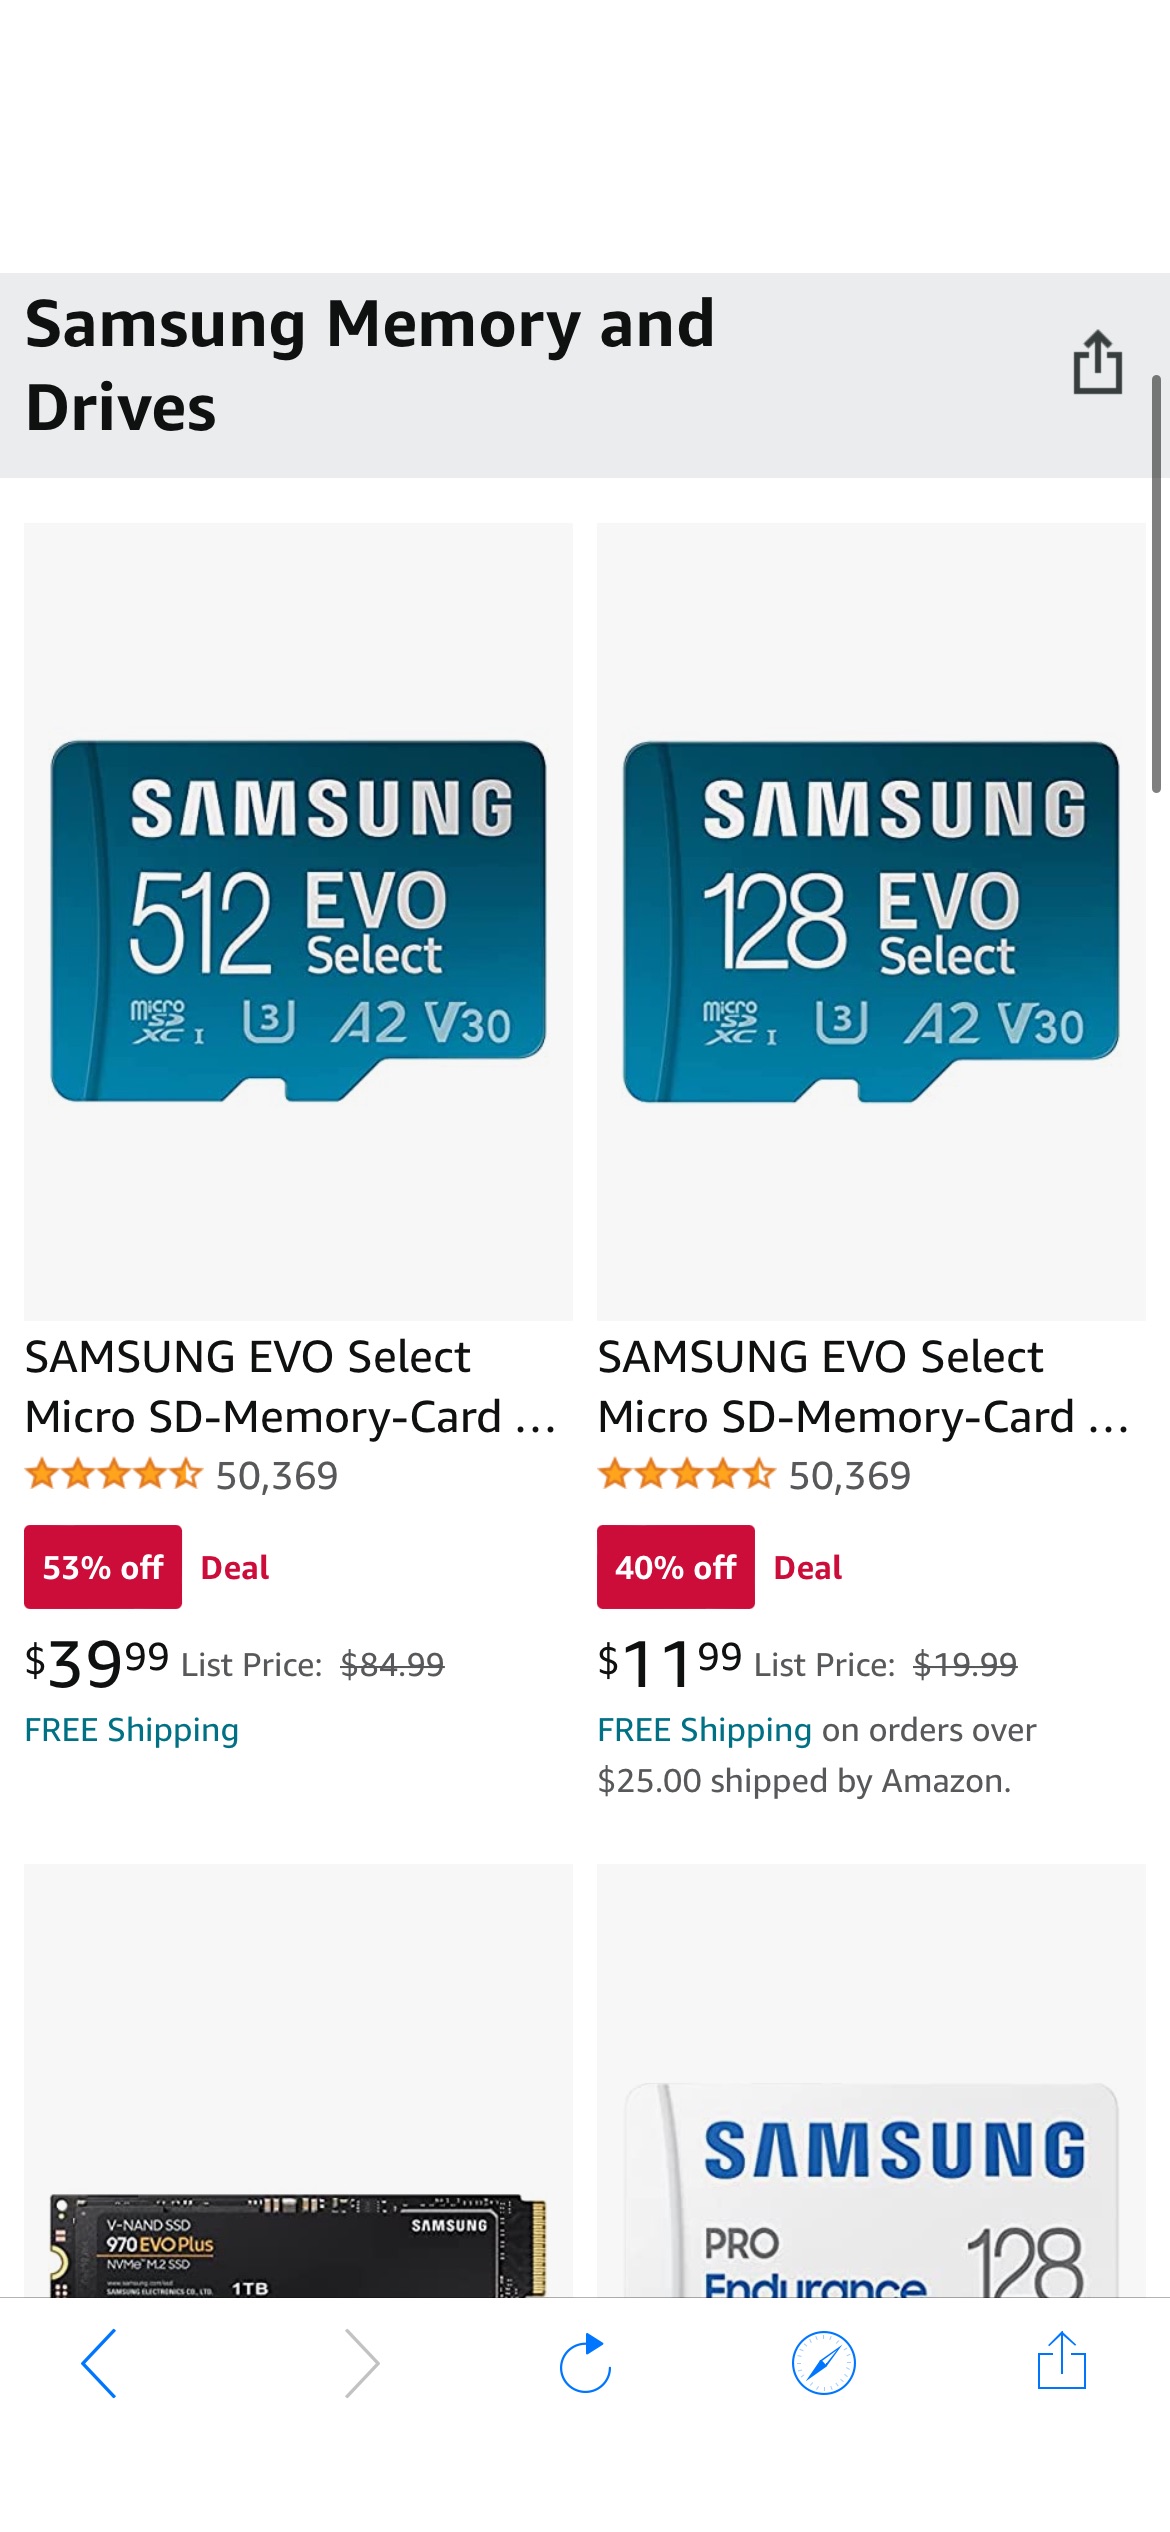 Samsung Memory and Drives up to 50% off